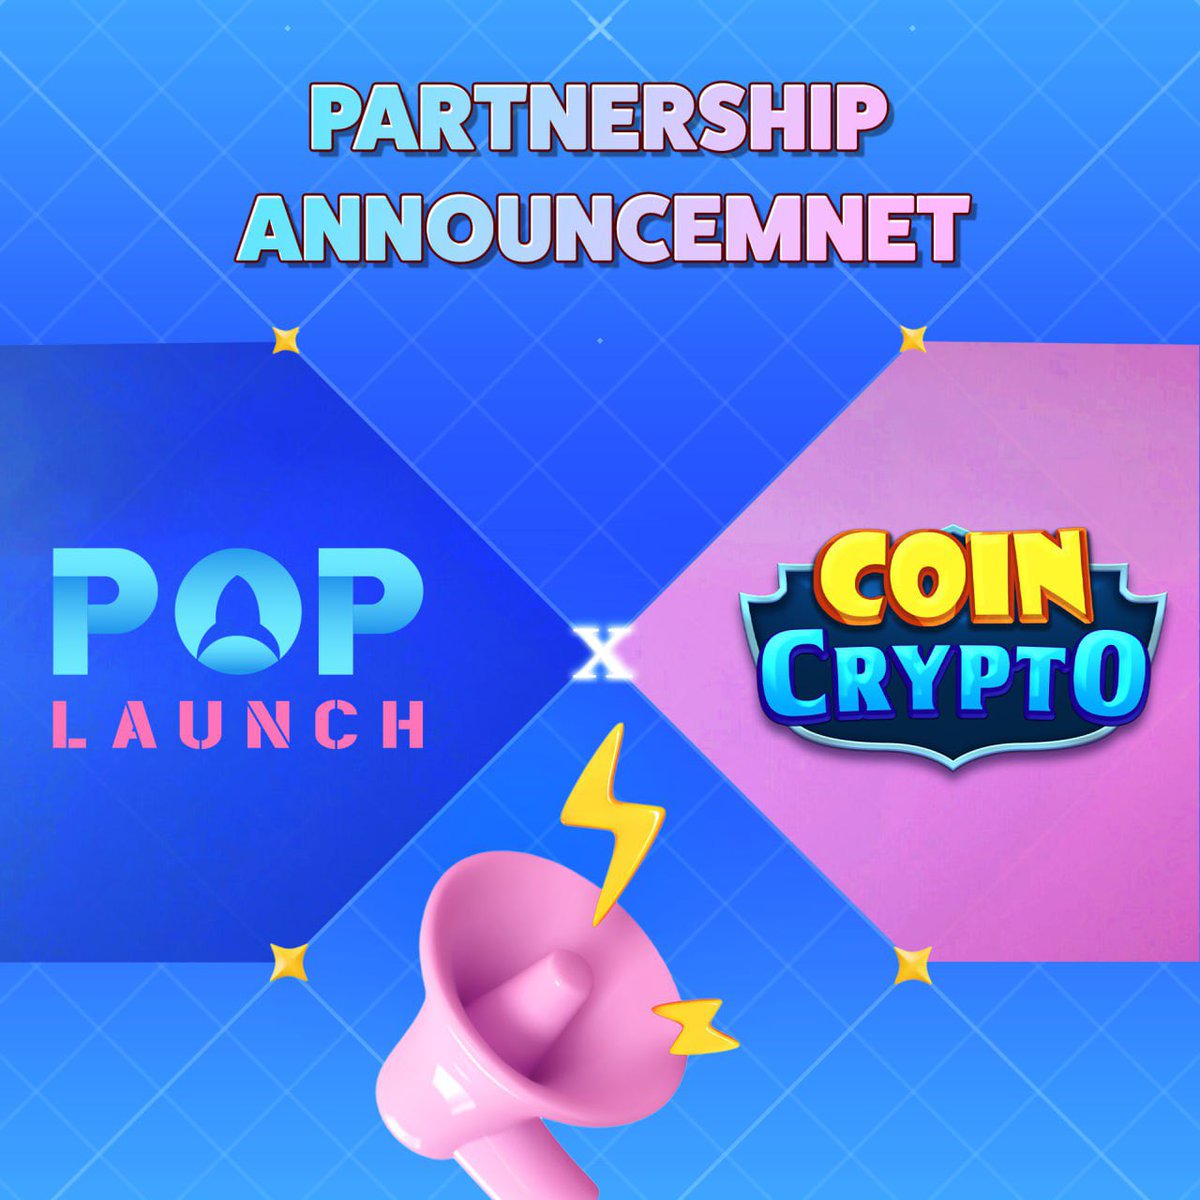 [PARTNERSHIP ANNOUNCEMENT] PopLaunch x CoinCrypto 🤝

🎮 Play CoinCrypto: t.me/CoinCryptoGame…
🚀 Find code in here to get extra spins: t.me/CoinCryptogame

🥳 PopLaunch is thrilled to introduce our newest partner on our gamification launchpad platform: CoinCrypto - The…